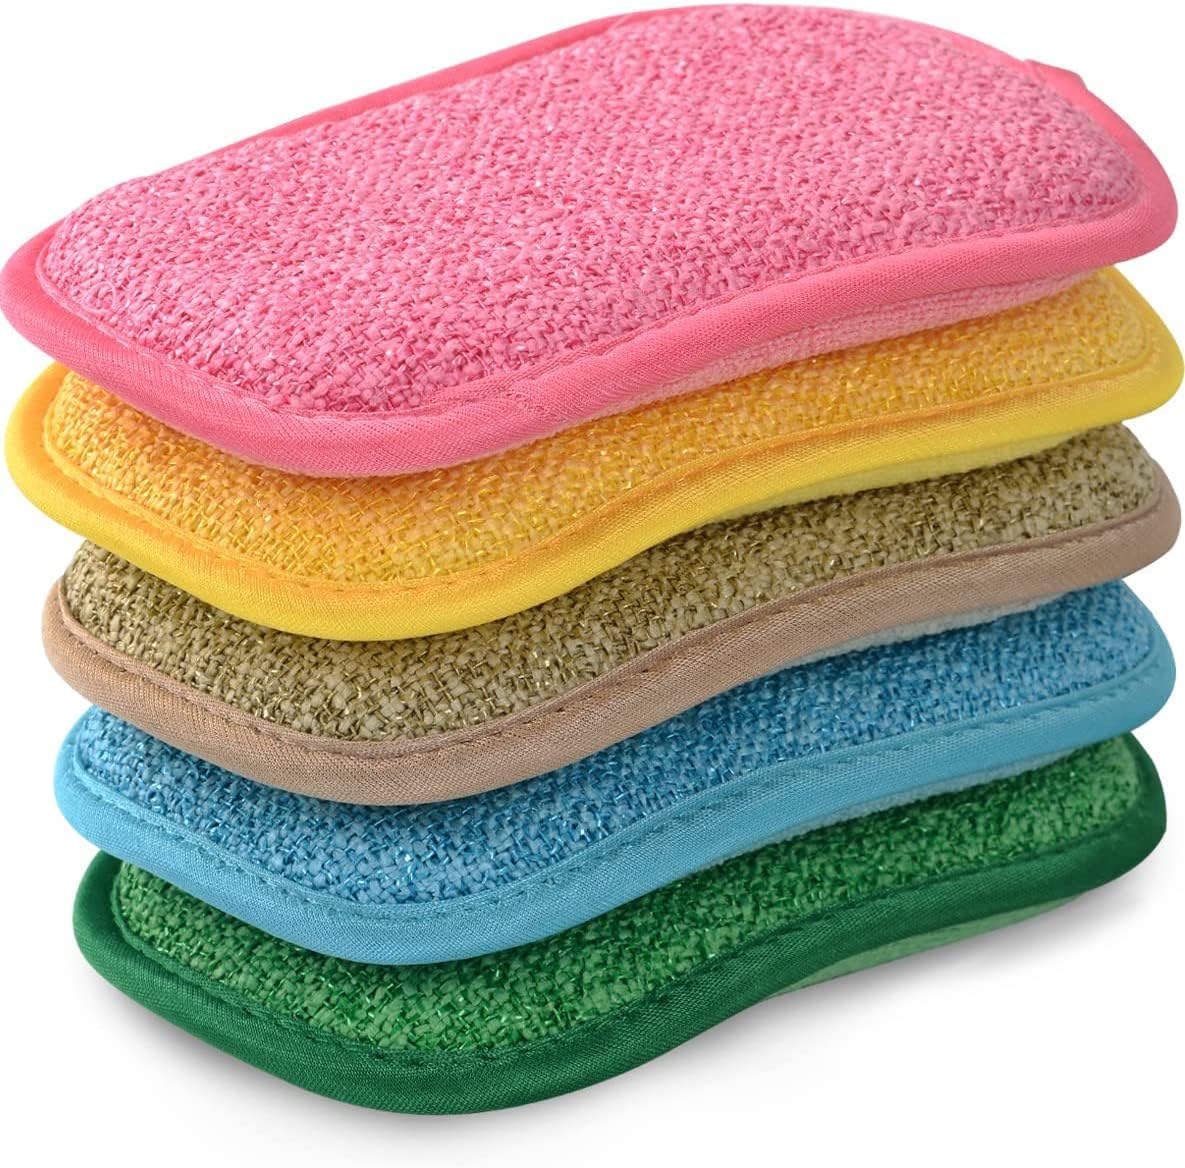  GOOSGUS Dish Sponges Kitchen for Cleaning 9 Pack, Cute